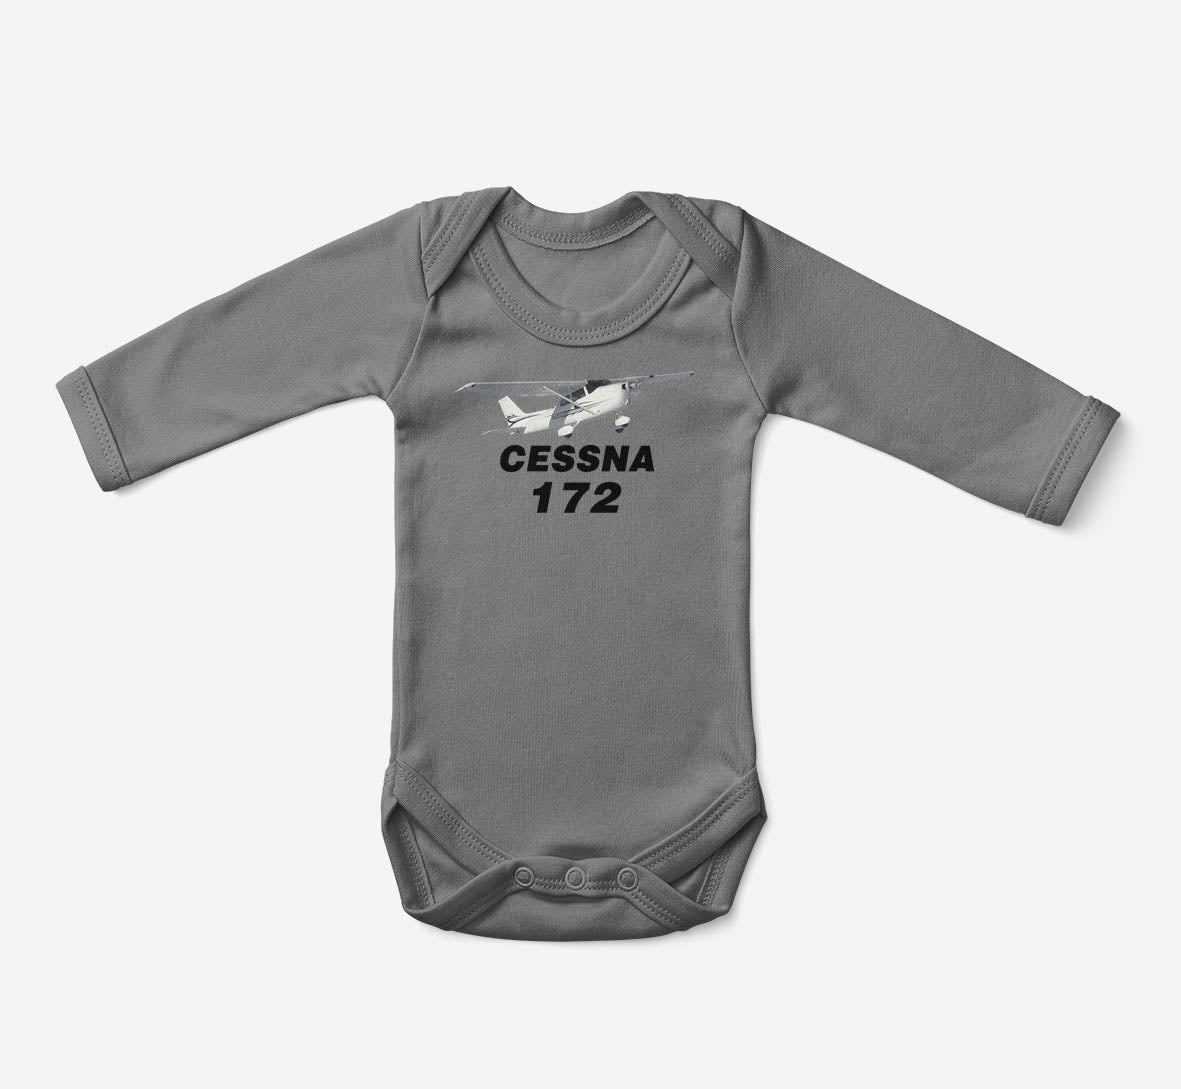 The Cessna 172 Designed Baby Bodysuits